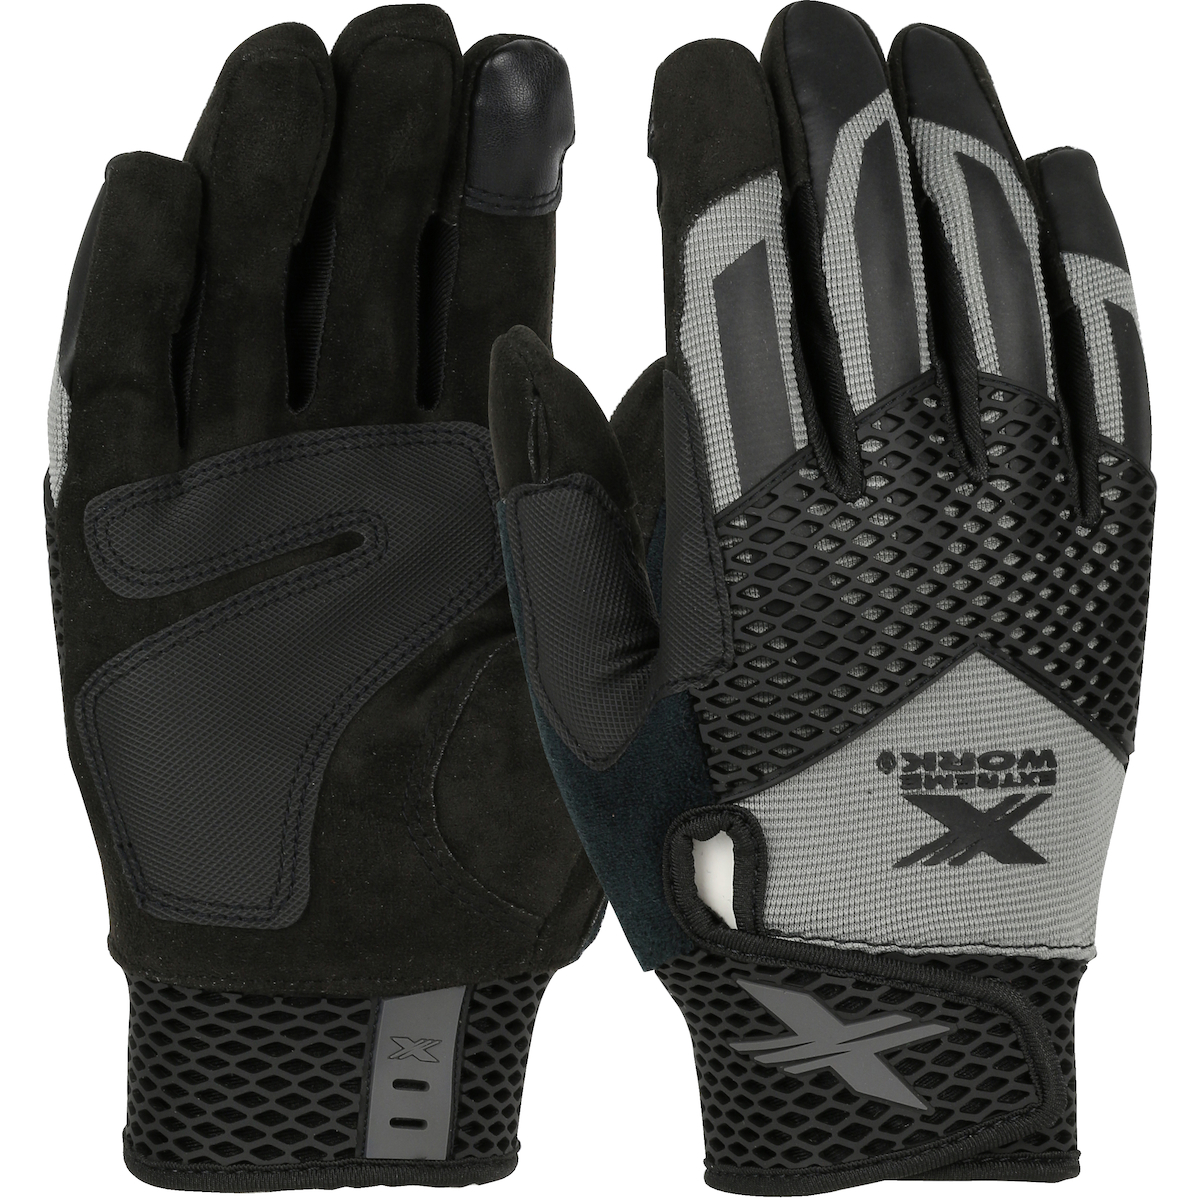 89303 PIP® West Chester Extreme Work® Knuckle KnoX™ Work Gloves - grey